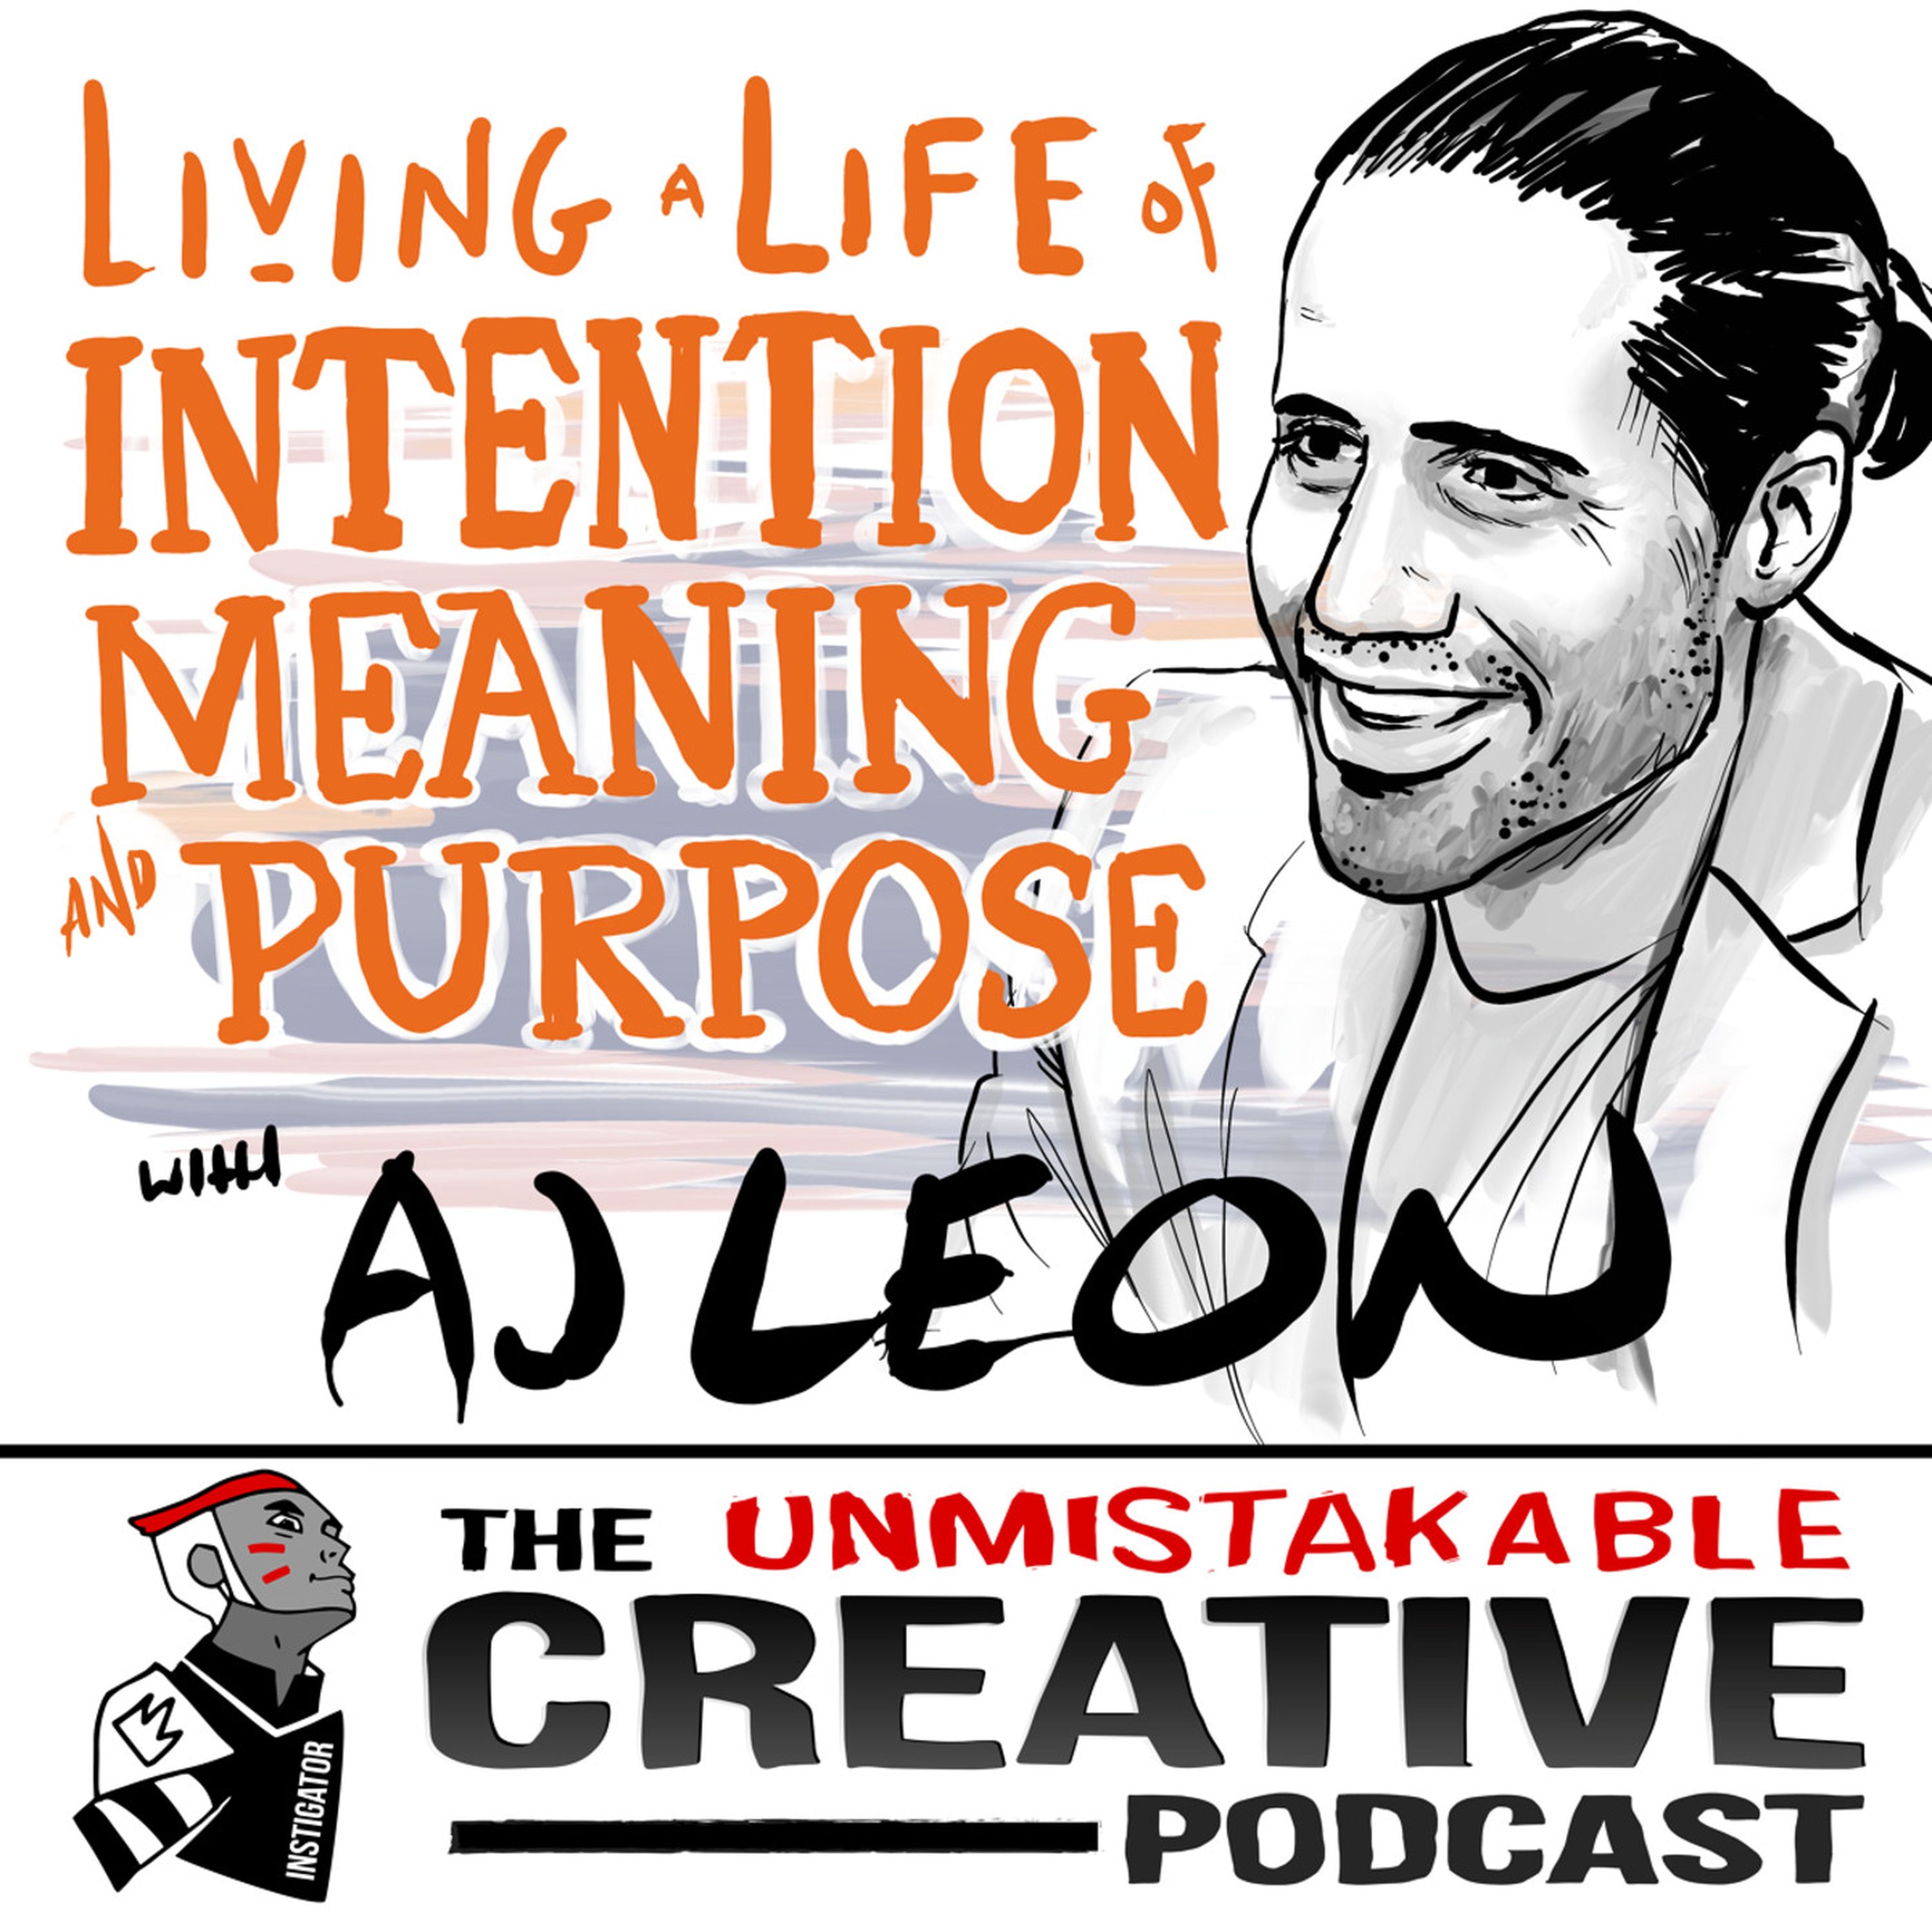 Best of: Living a Life of Intention, Meaning and Purpose with AJ Leon